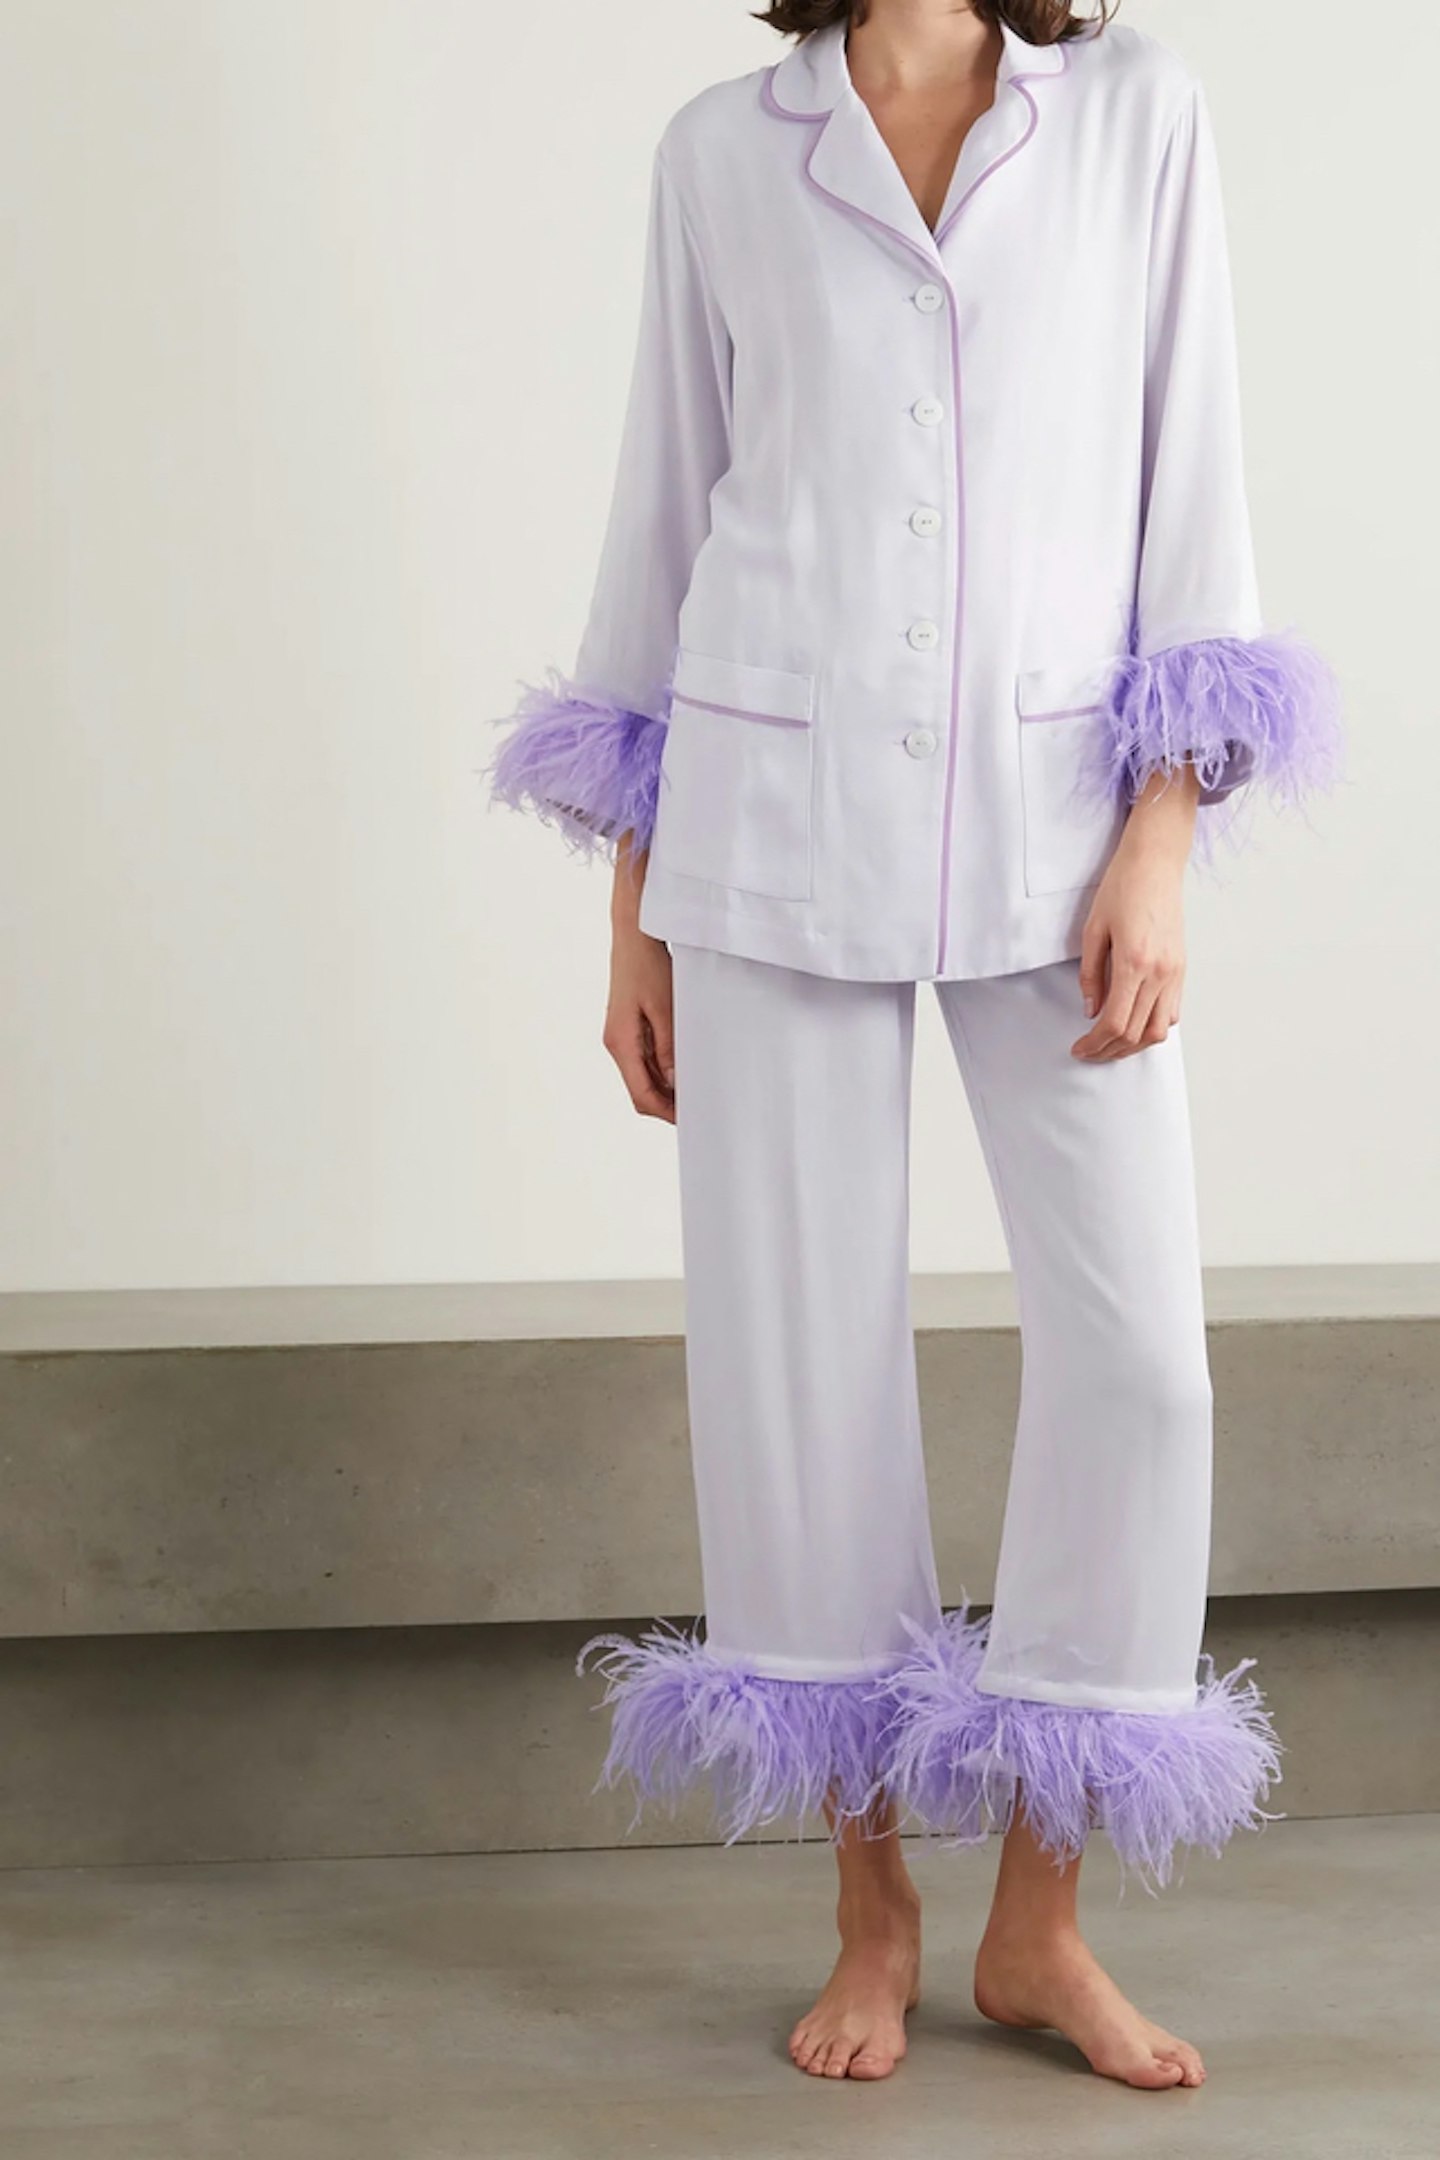 By Rotation, Daily SleeperParty feather-trimmed crepe de chine pajama set, from £7